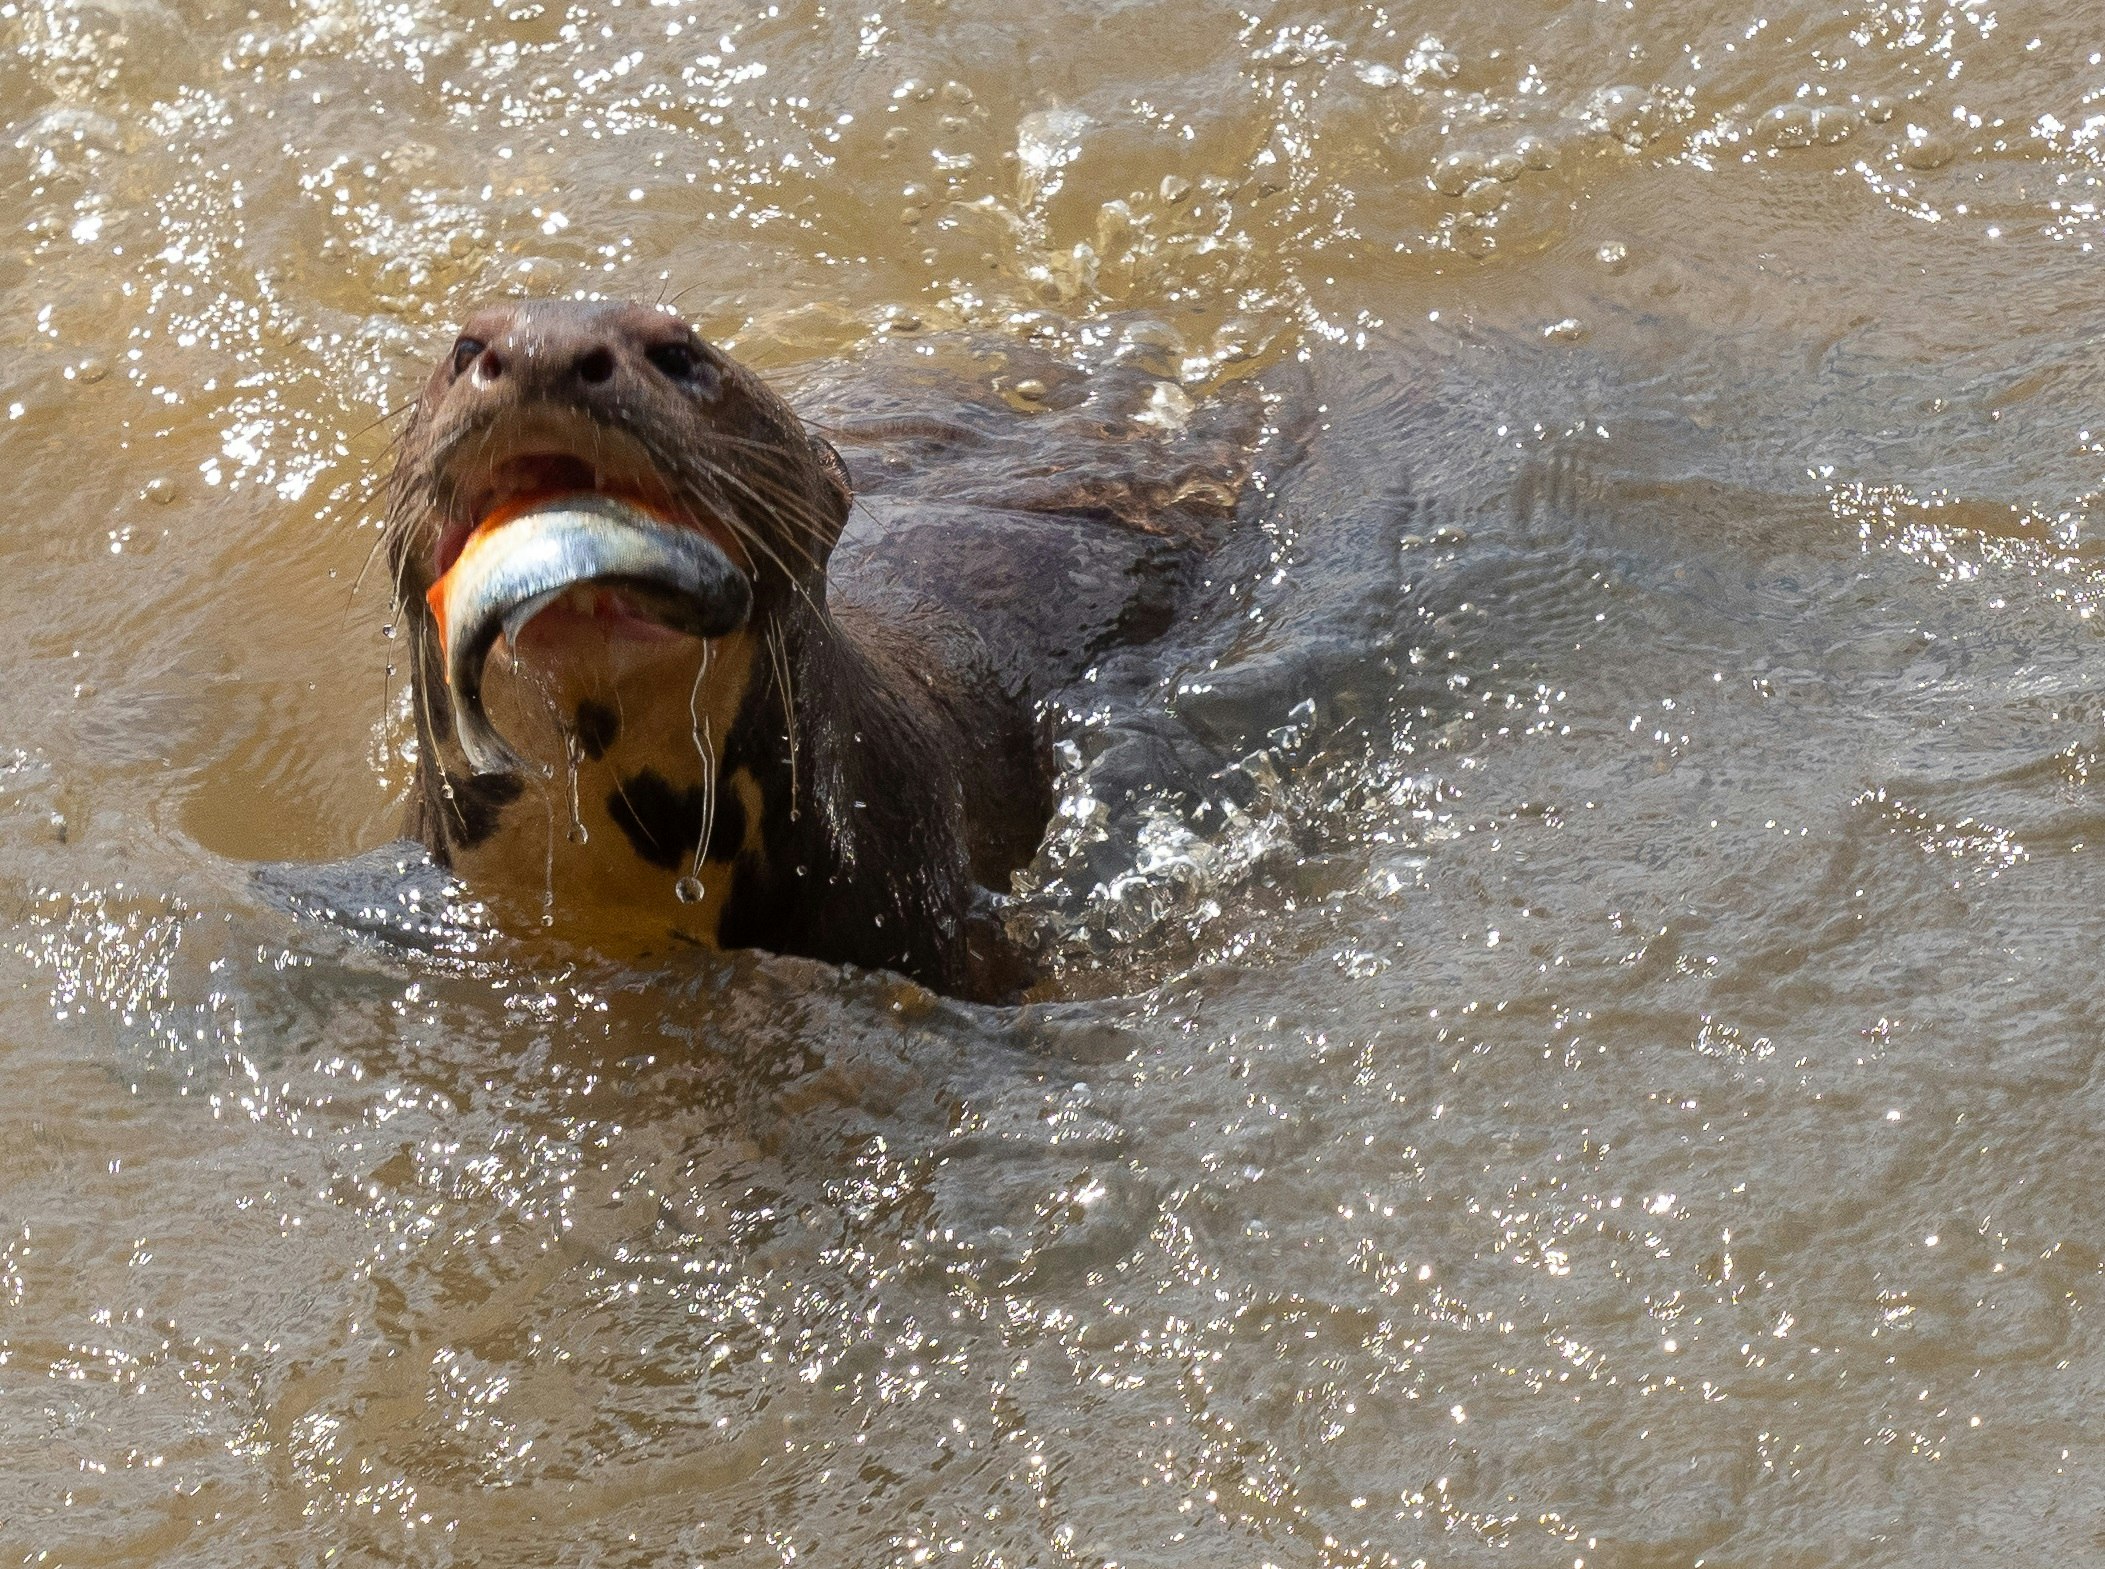 The head of a giant otter protrudes from the river's surface; in its mouth is a freshly-caught fish.